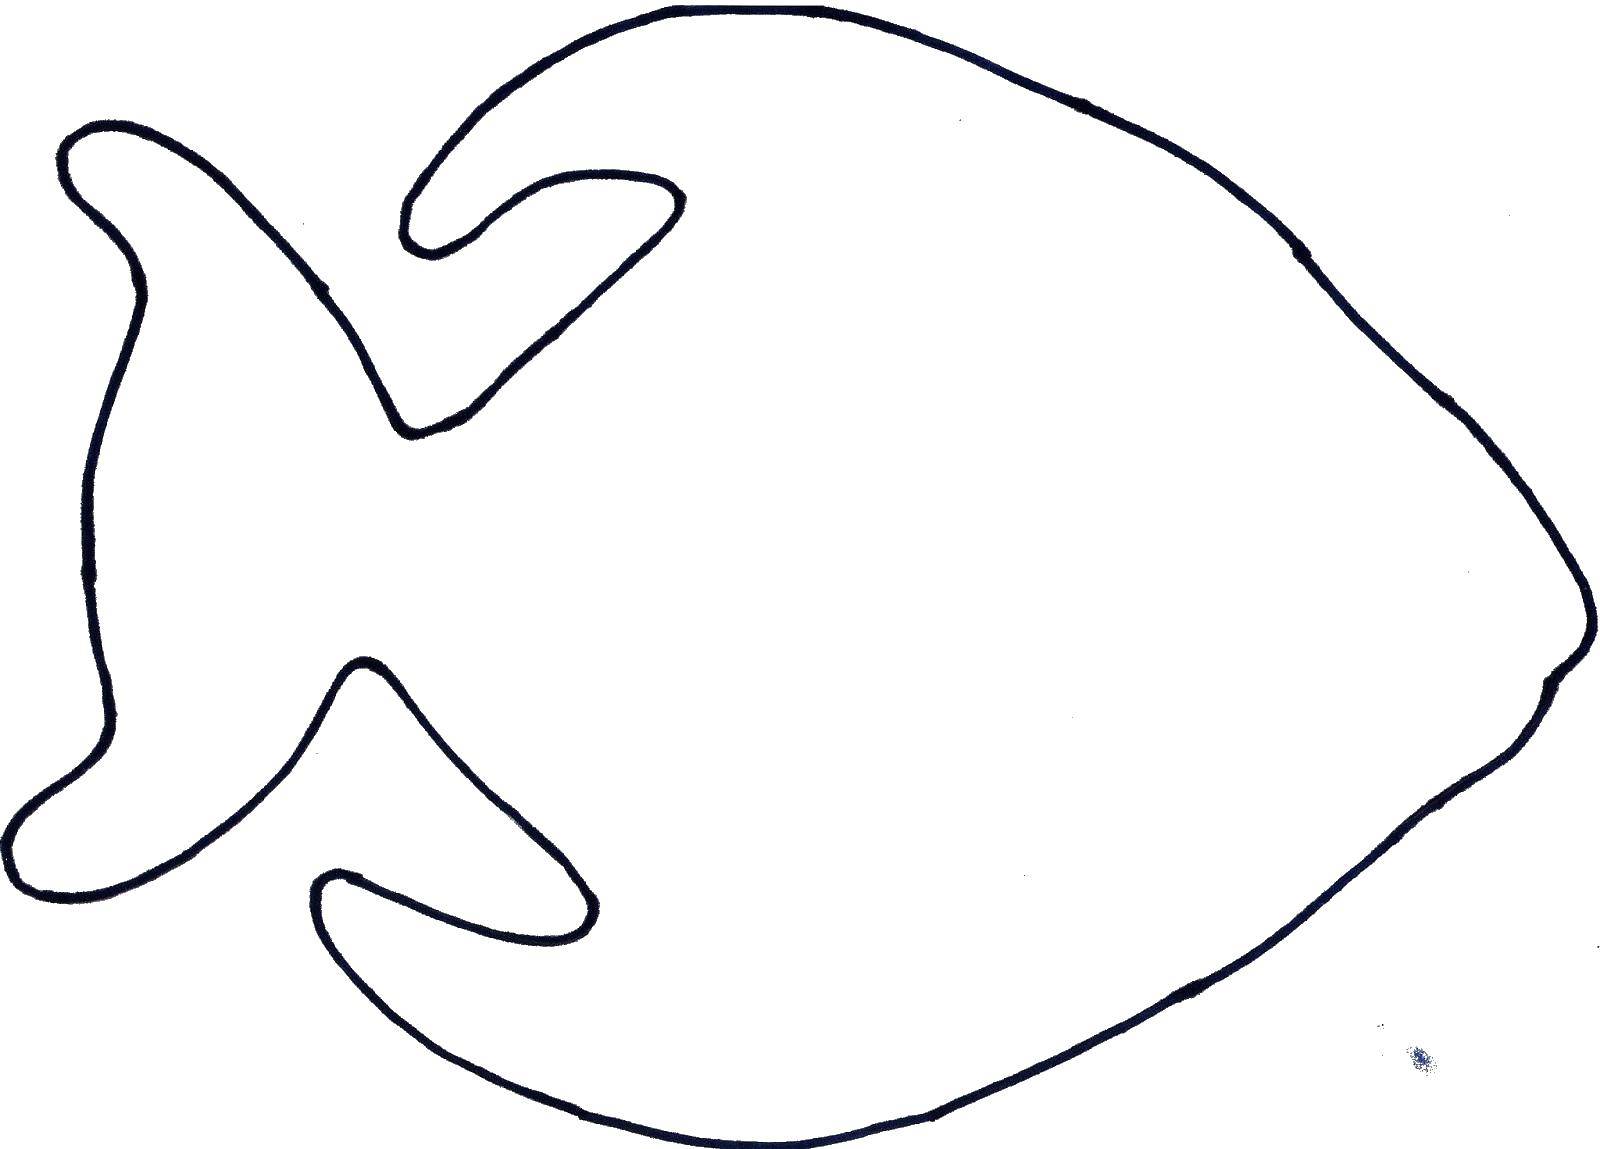 Coloring A fish silhouette. Category The contours of the fish to cut. Tags:  the fish, contour, fin.